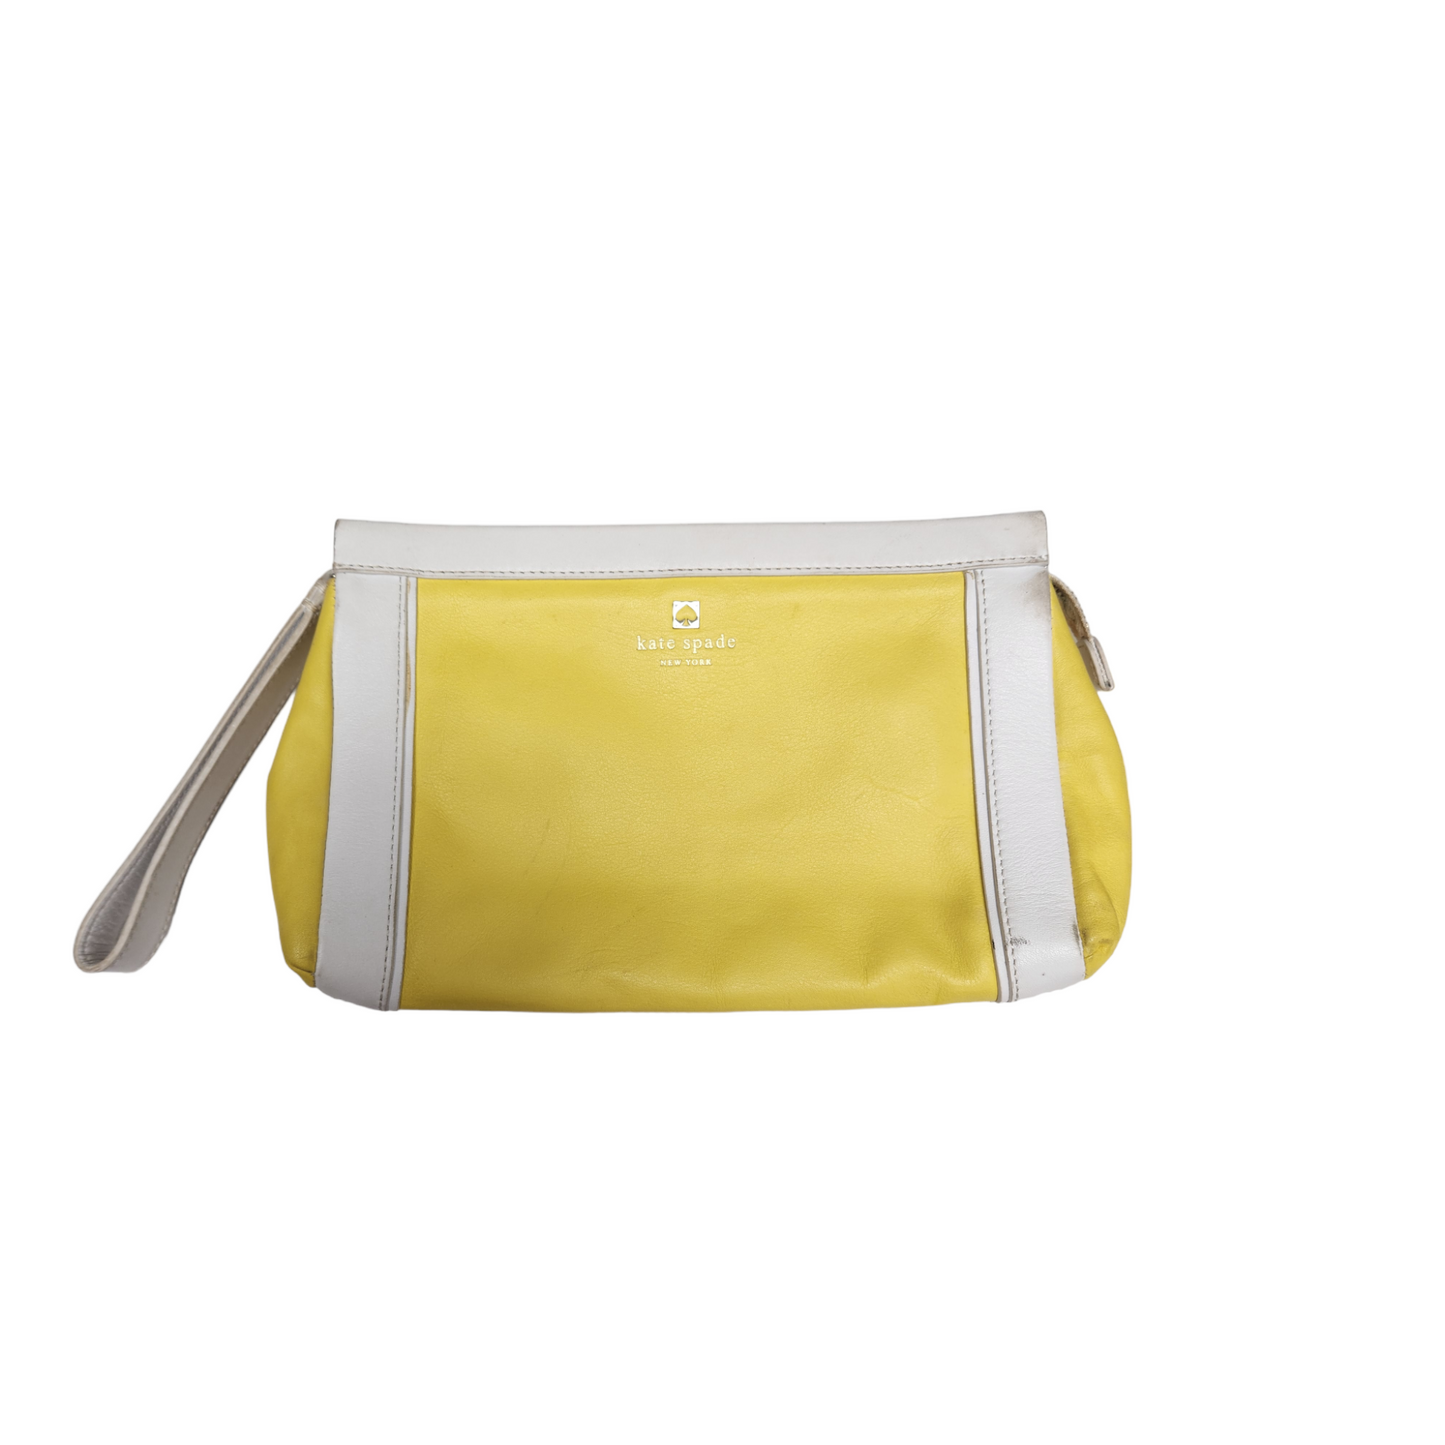 Yellow/White Clutch by Kate Spade